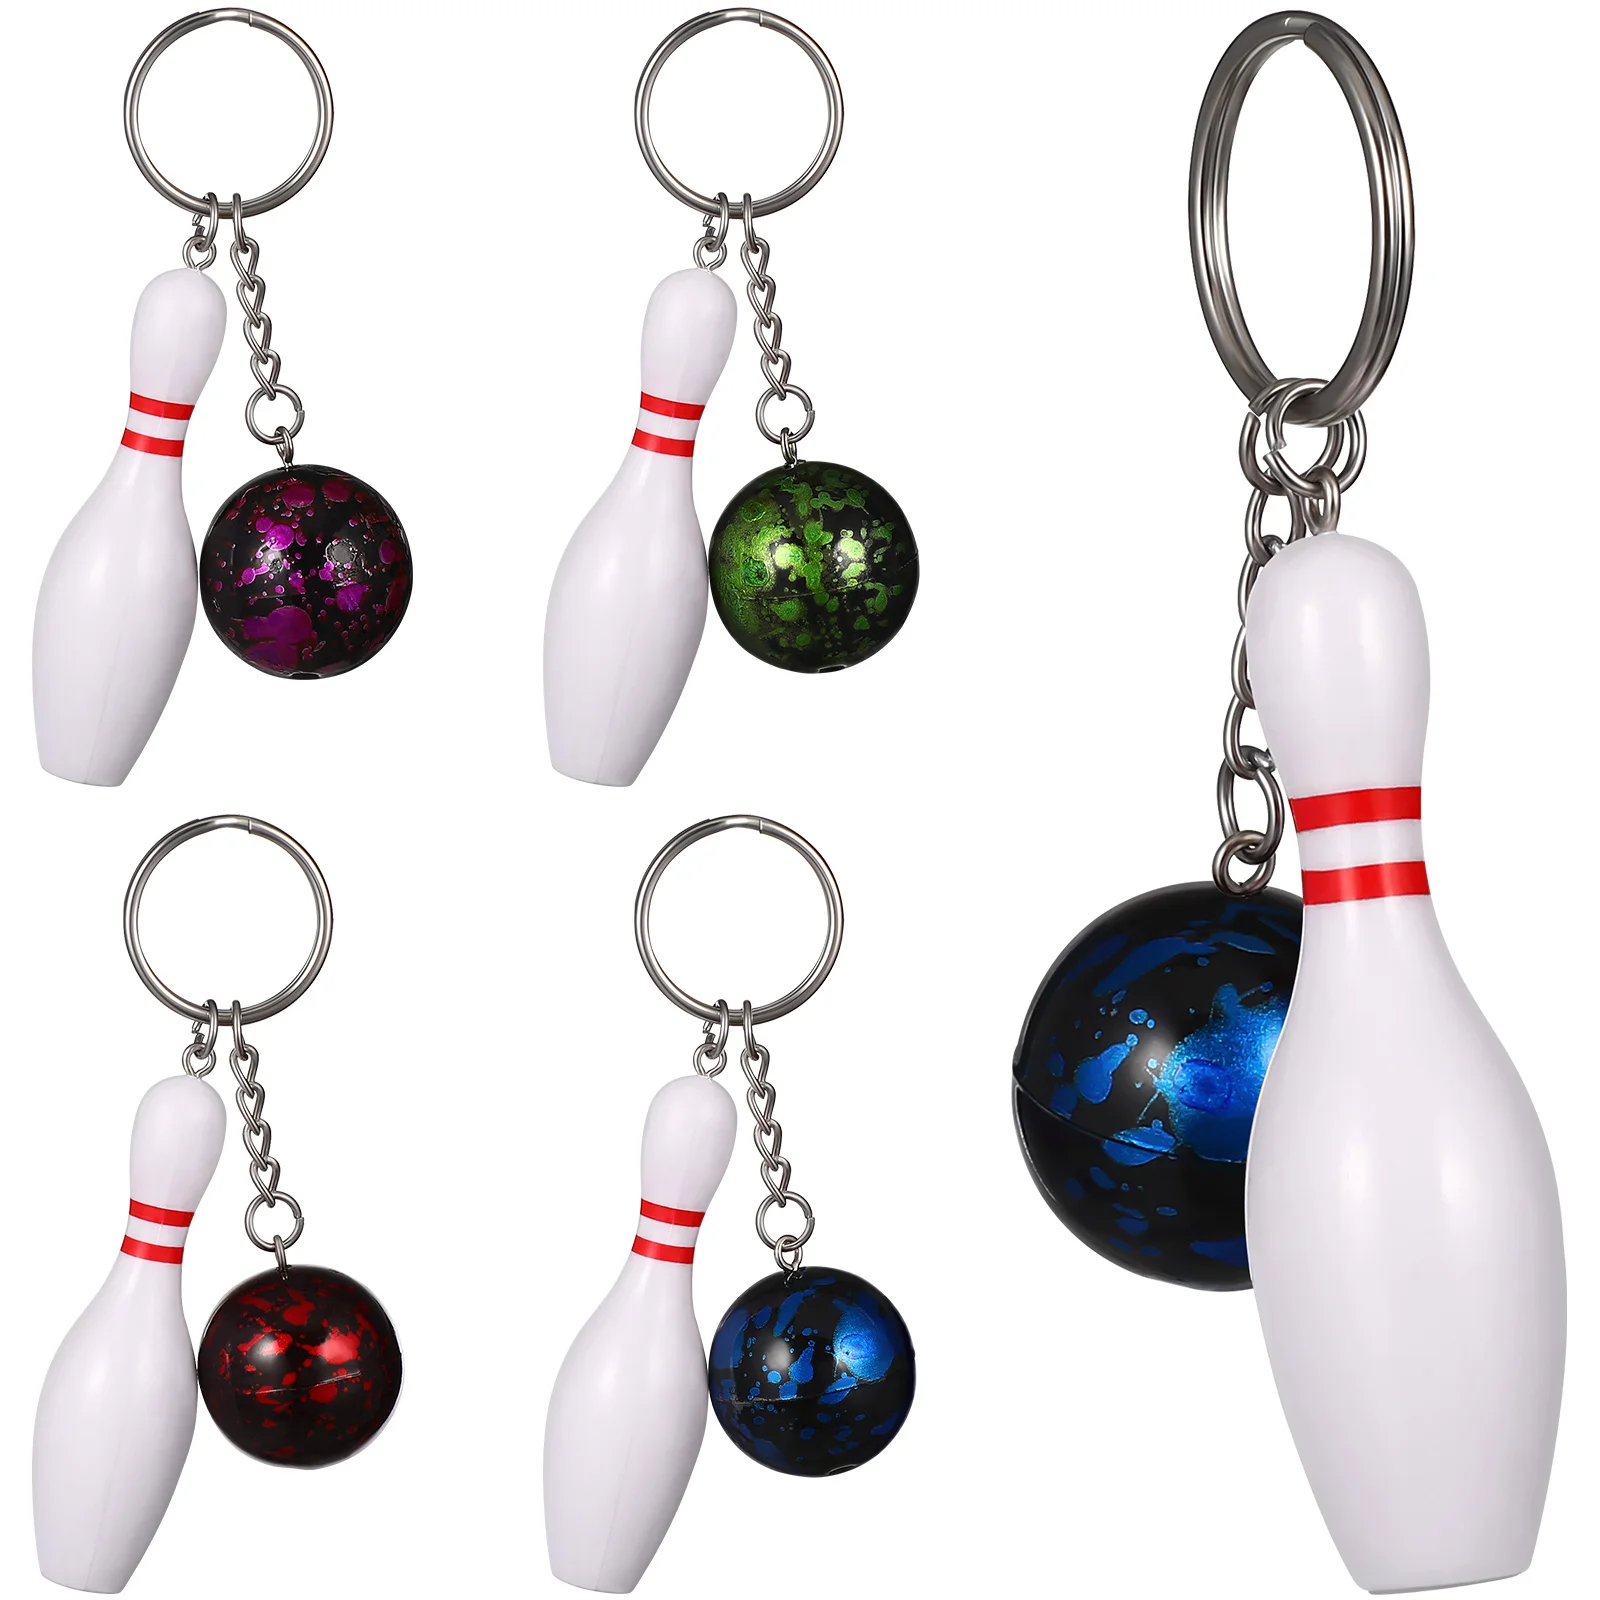 

10 Pcs Bowling Keychains Sport Style Pendant Keyrings Bowling Party Favors for Backpack Souvenir Gifts